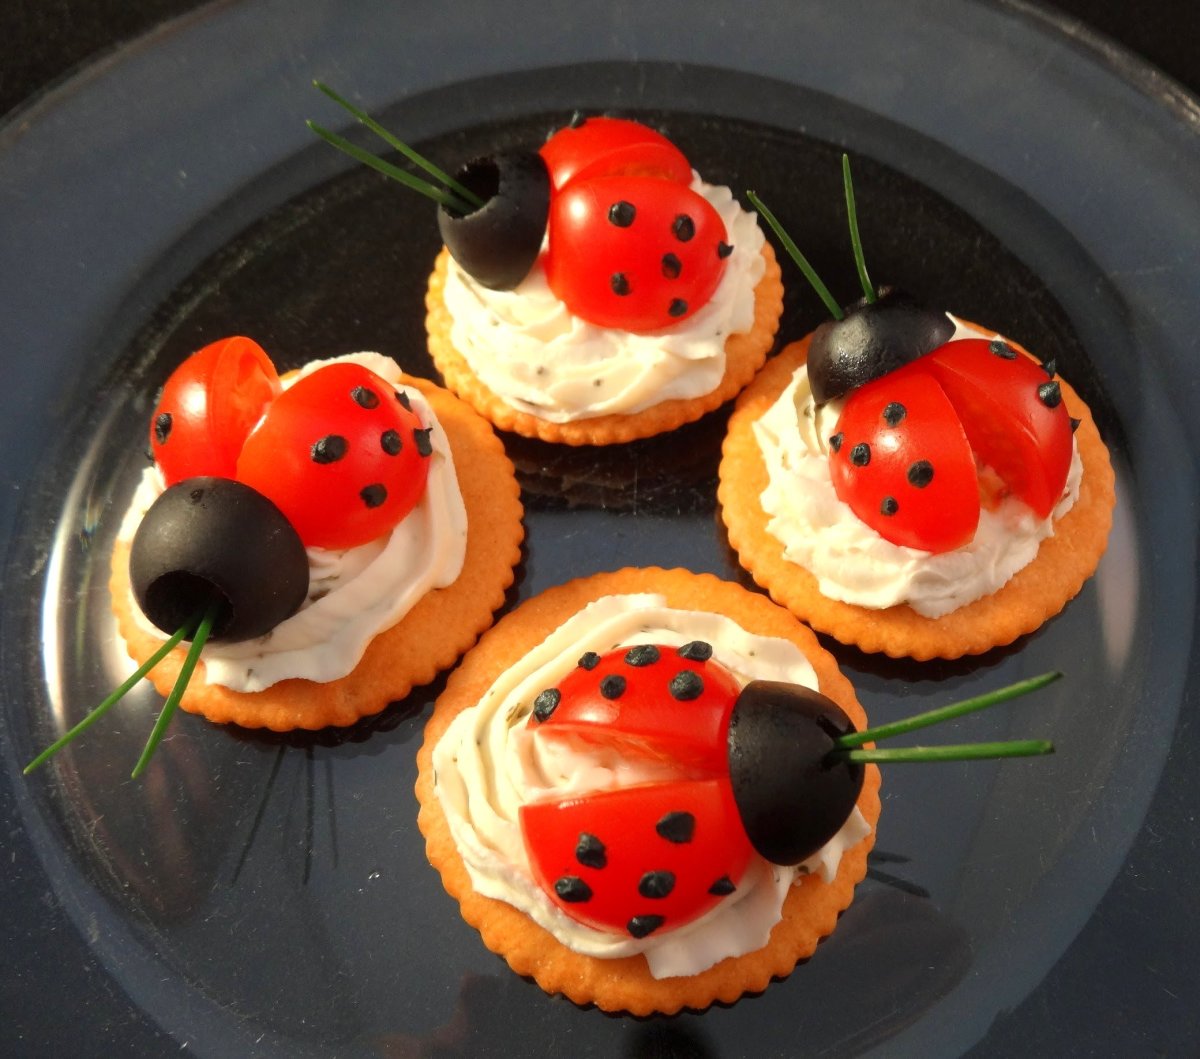 Top crackers with delightful ladybugs to impress your guests on Easter.